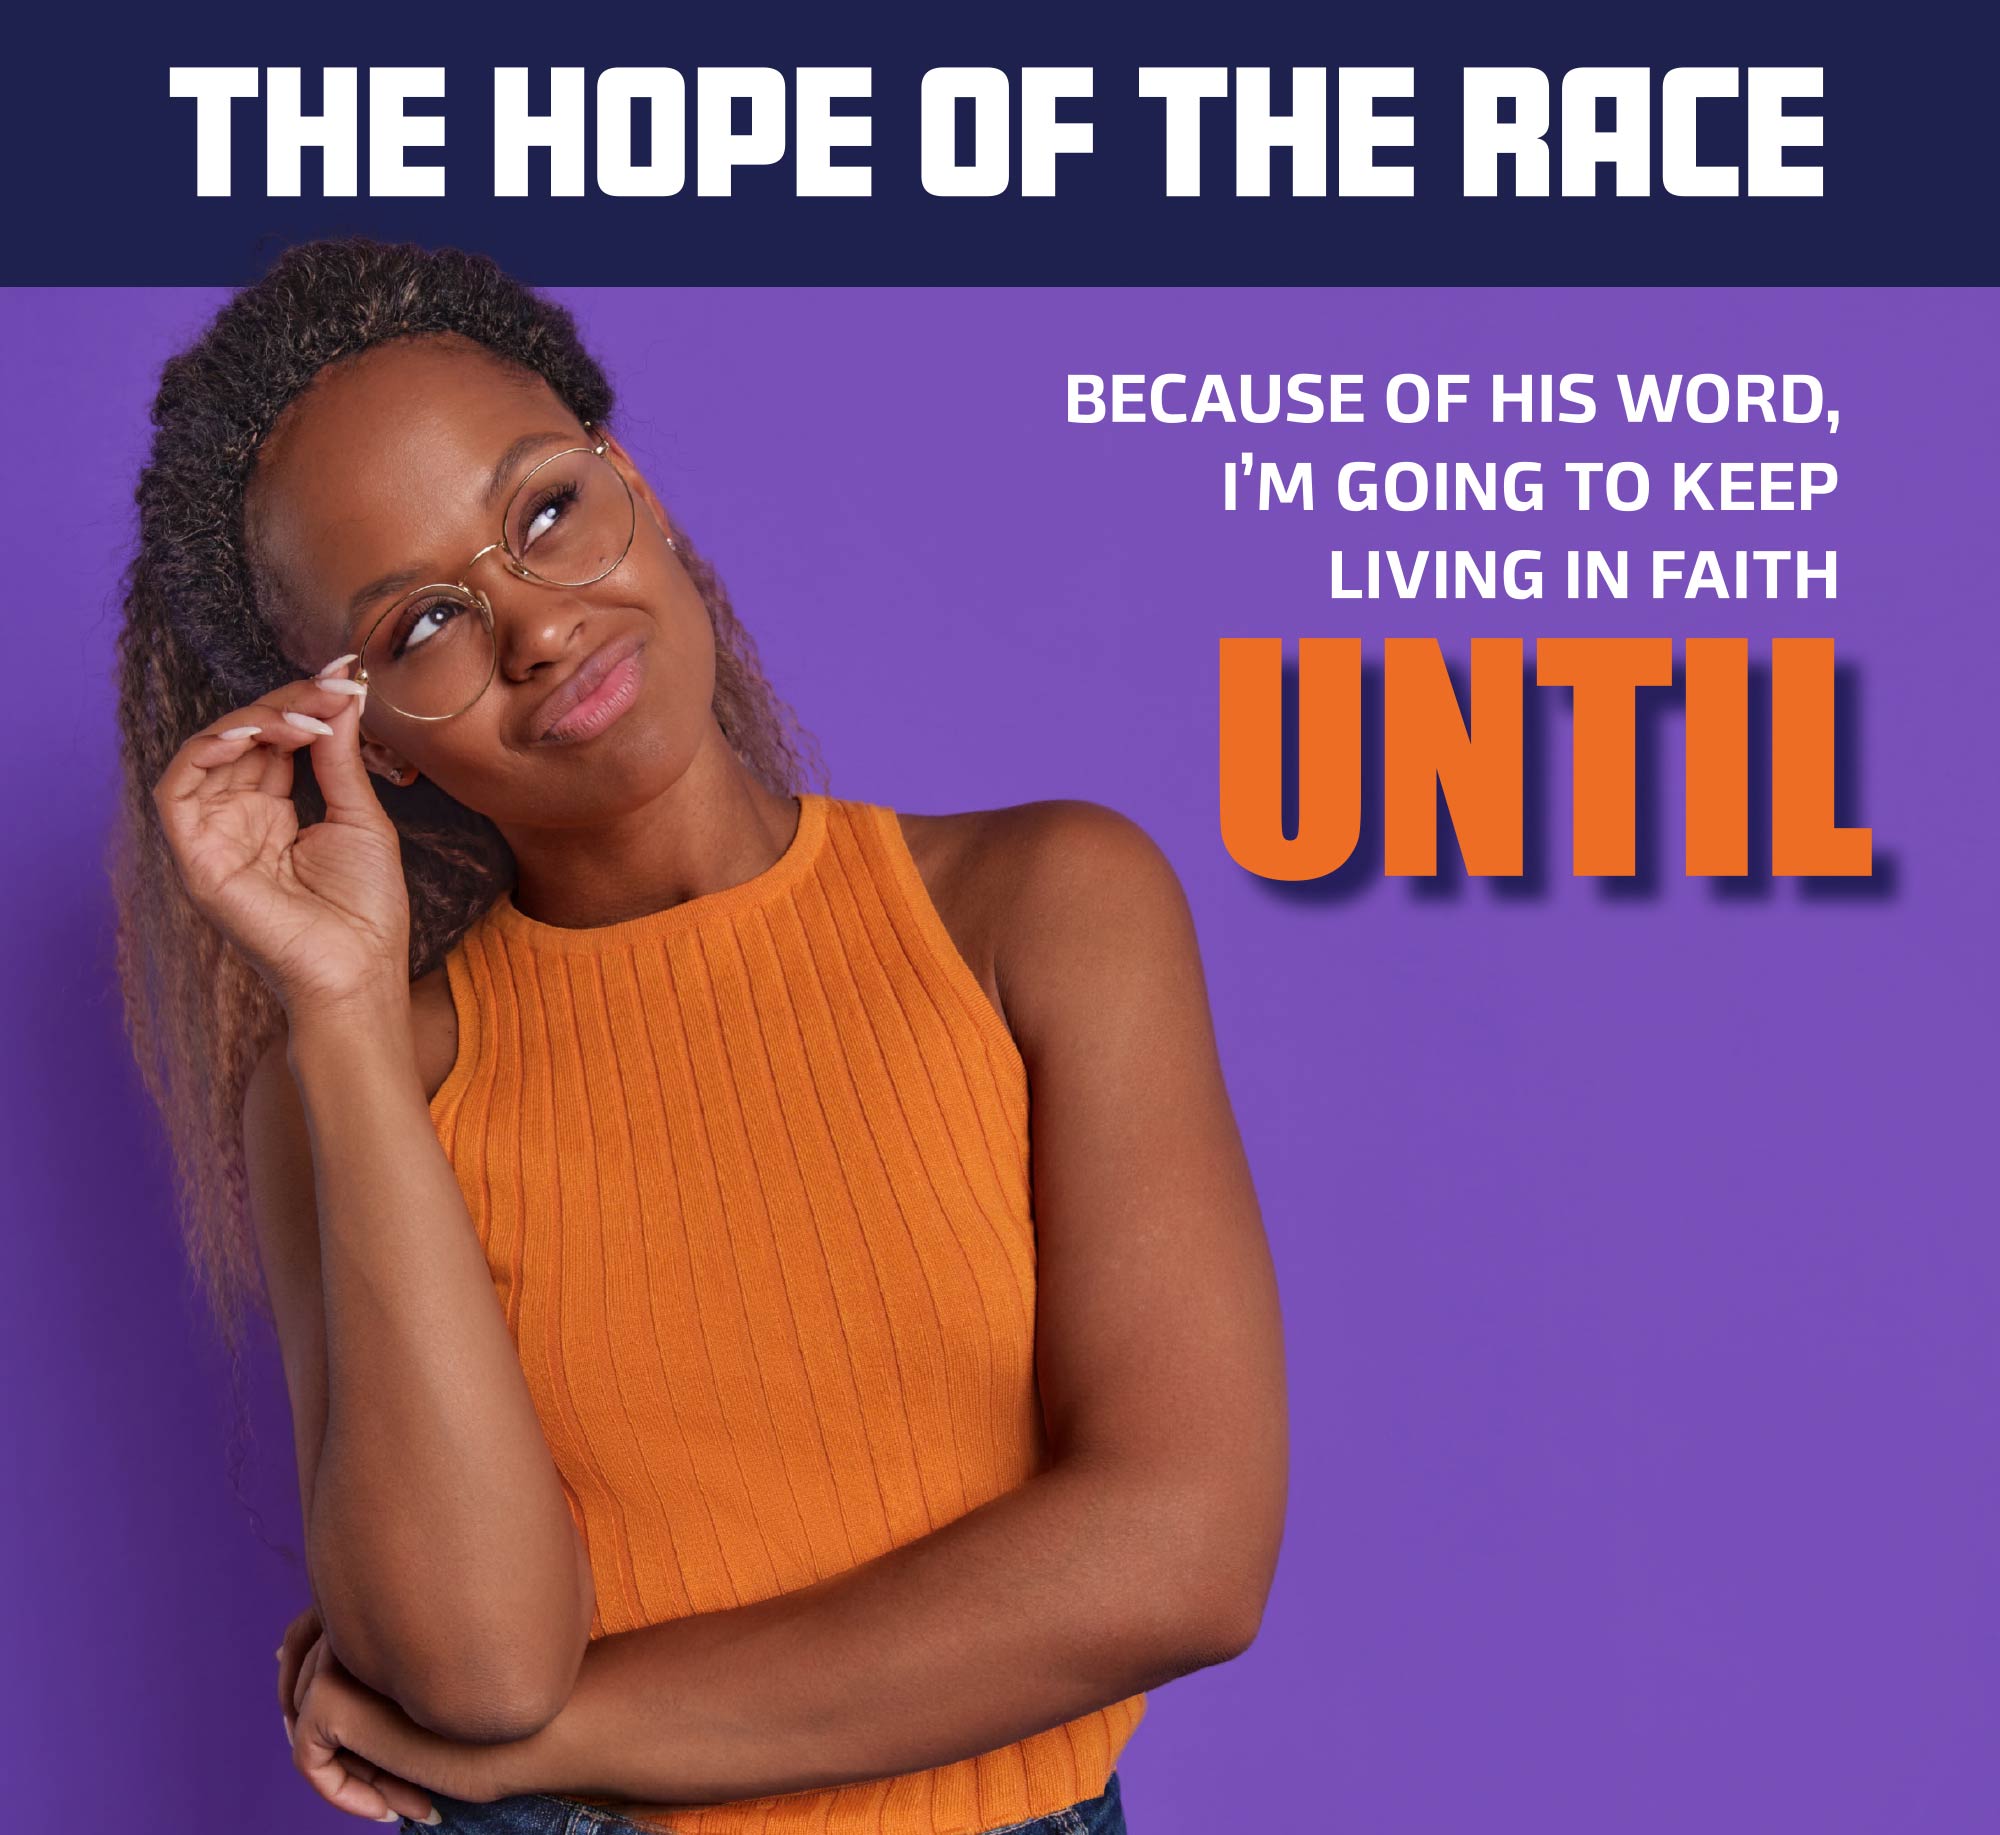 The Hope of the Race Because of his word, I'm going to keep living in faith Until...